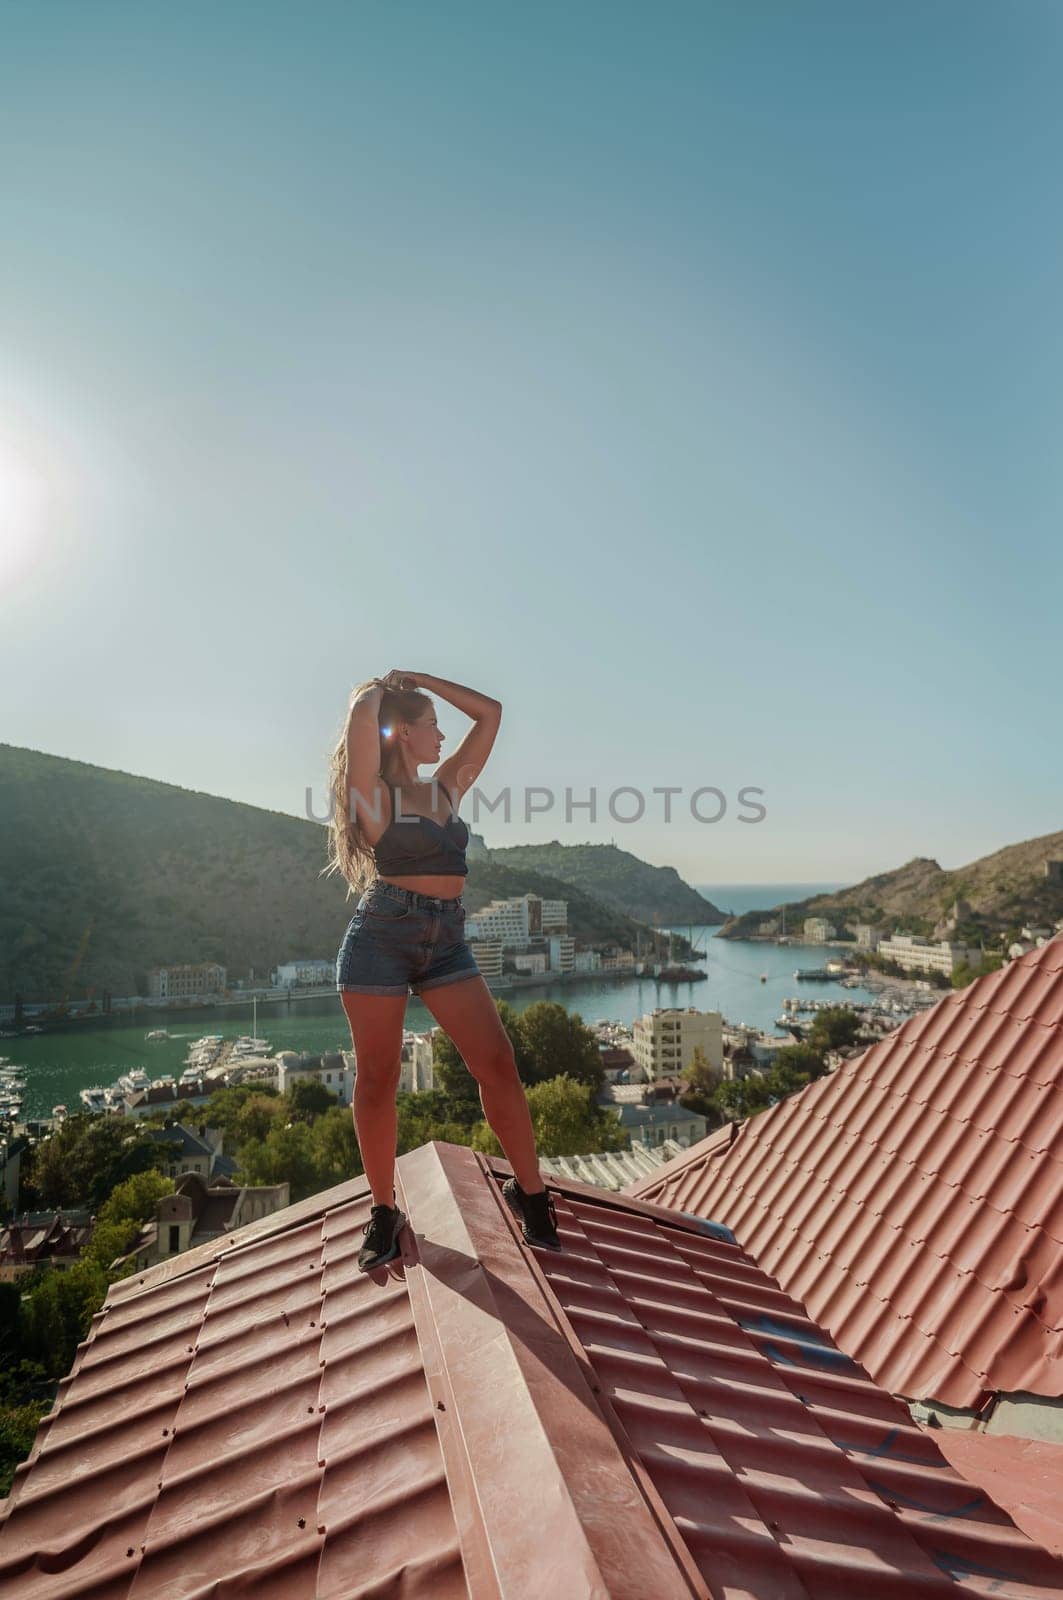 Woman standing on rooftop, enjoys town view and sea mountains. Peaceful rooftop relaxation. Below her, there is a town with several boats visible in the water. Rooftop vantage point. by Matiunina